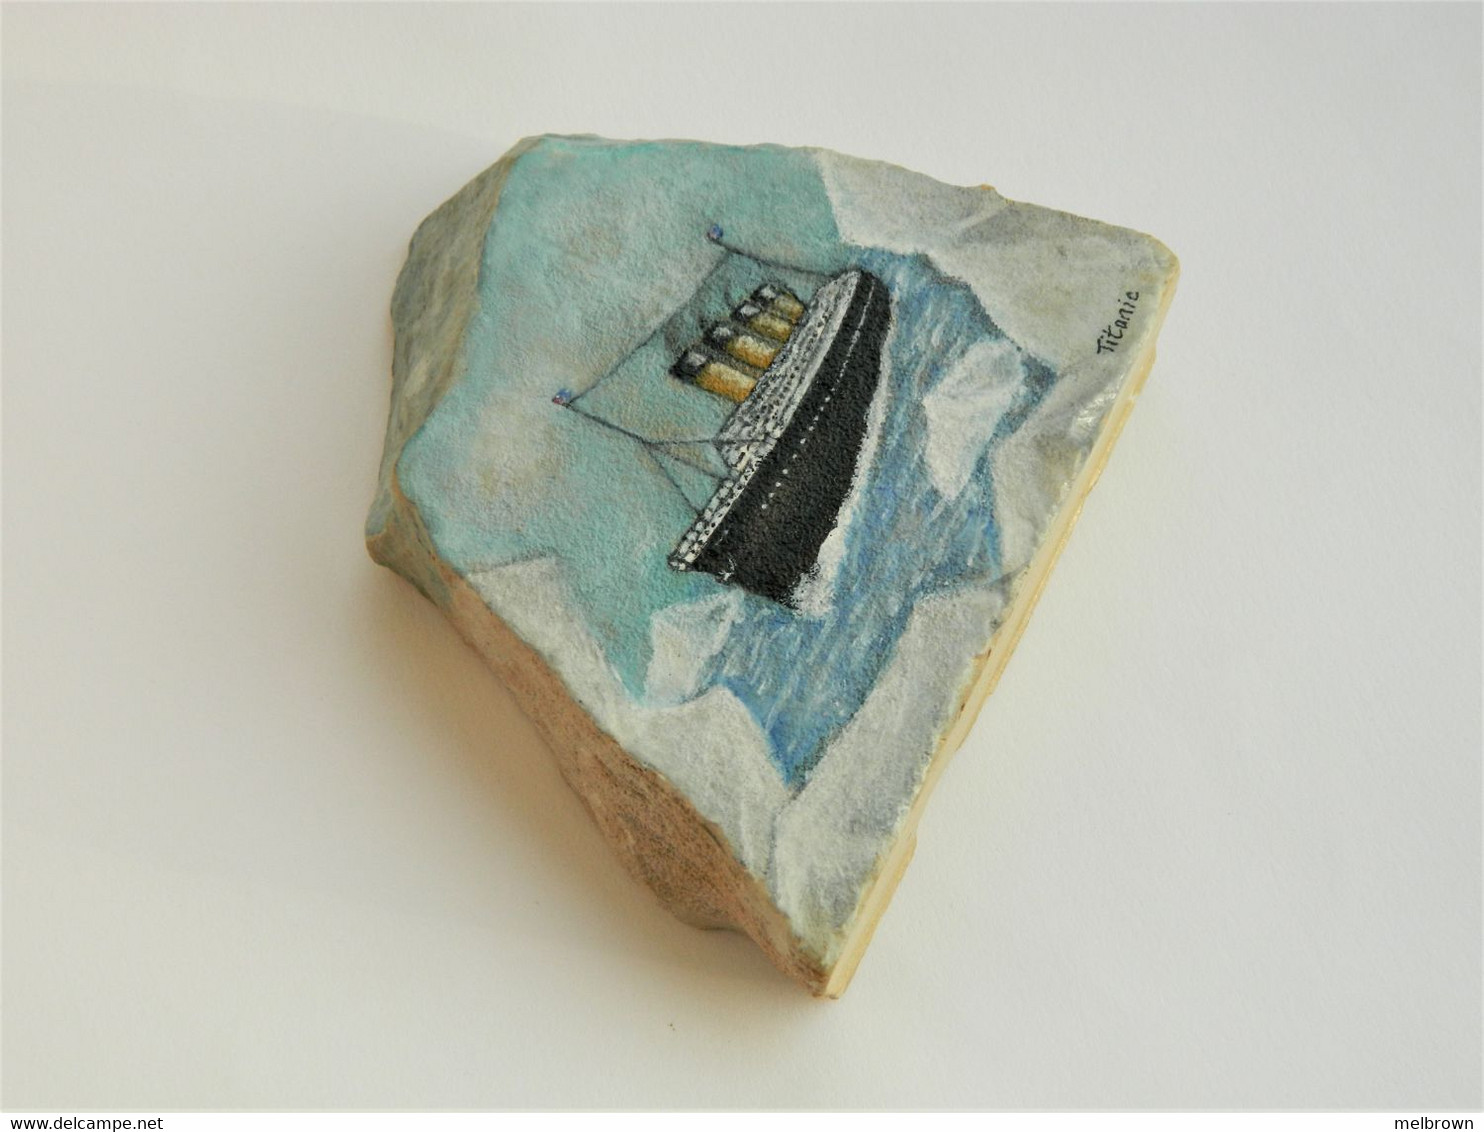 Original Painting Of The Titanic Hand Painted On A Spanish Tosca Stone Paperweight - Maritime Dekoration